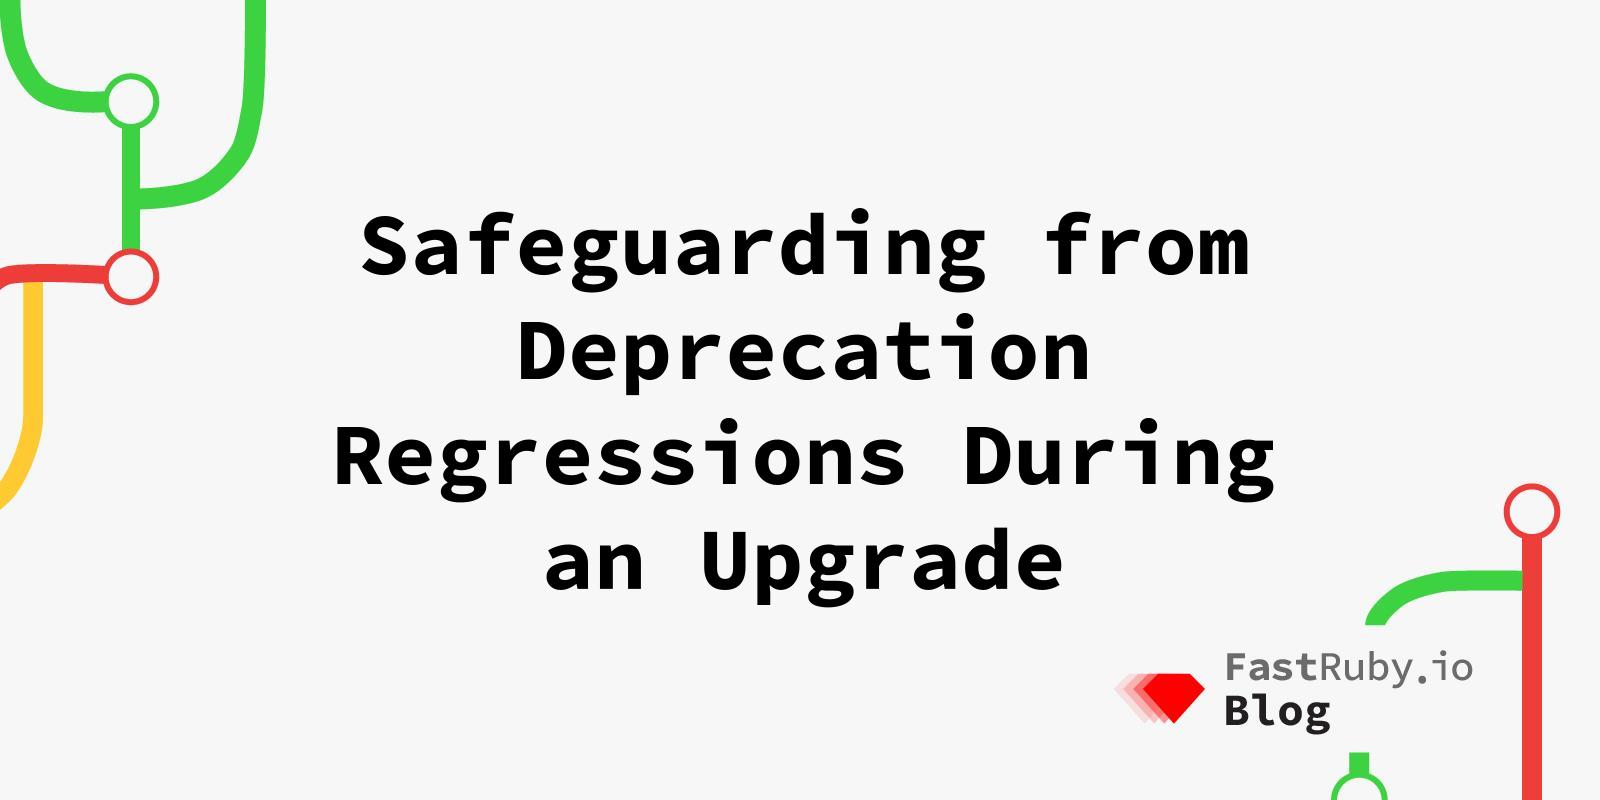 Safeguarding from Deprecation Regressions During an Upgrade